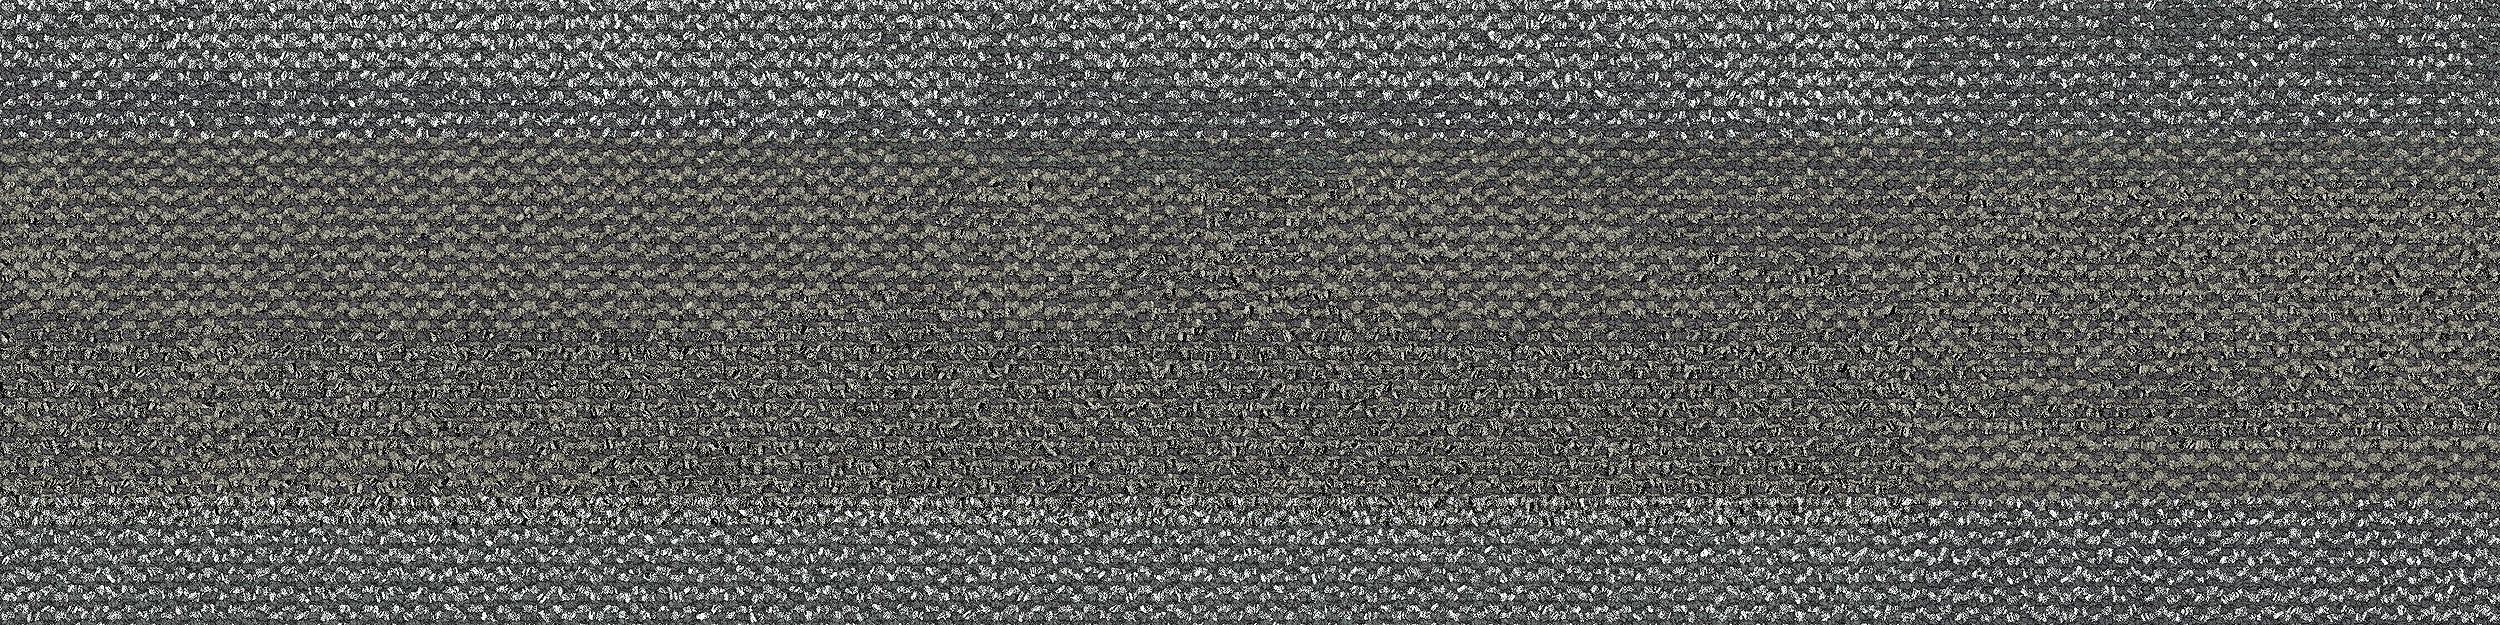 Naturally Weathered Carpet Tile In Wrought Iron numéro d’image 10